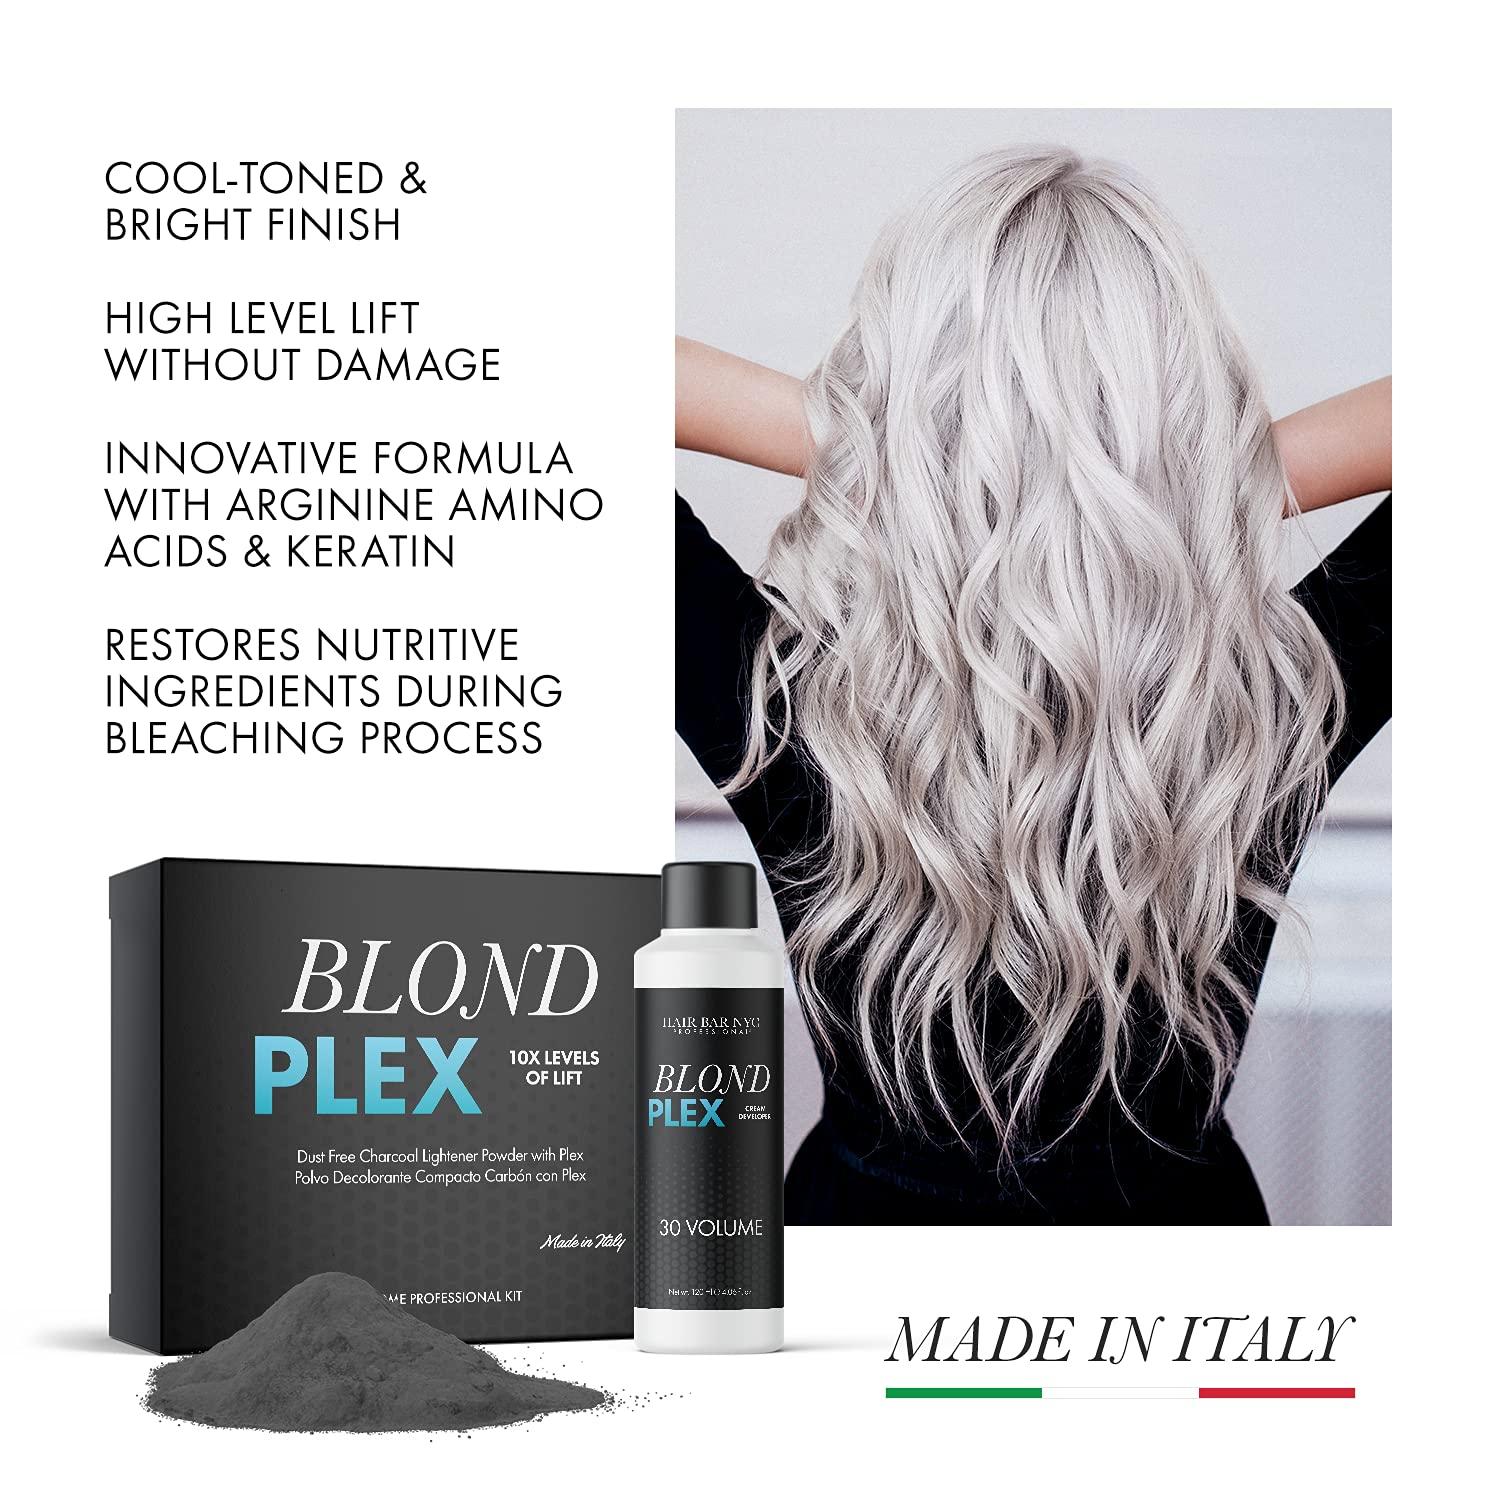 Hair Bar NYC Blond Bond Plex Extreme Lifting 10X Levels - Black/Charcoal  Dust Free Lightener with Hydrolized Keratin & Bond, Hair Bleach Powder  Cool-Toned & Bright Finish - Made in Italy 60g /